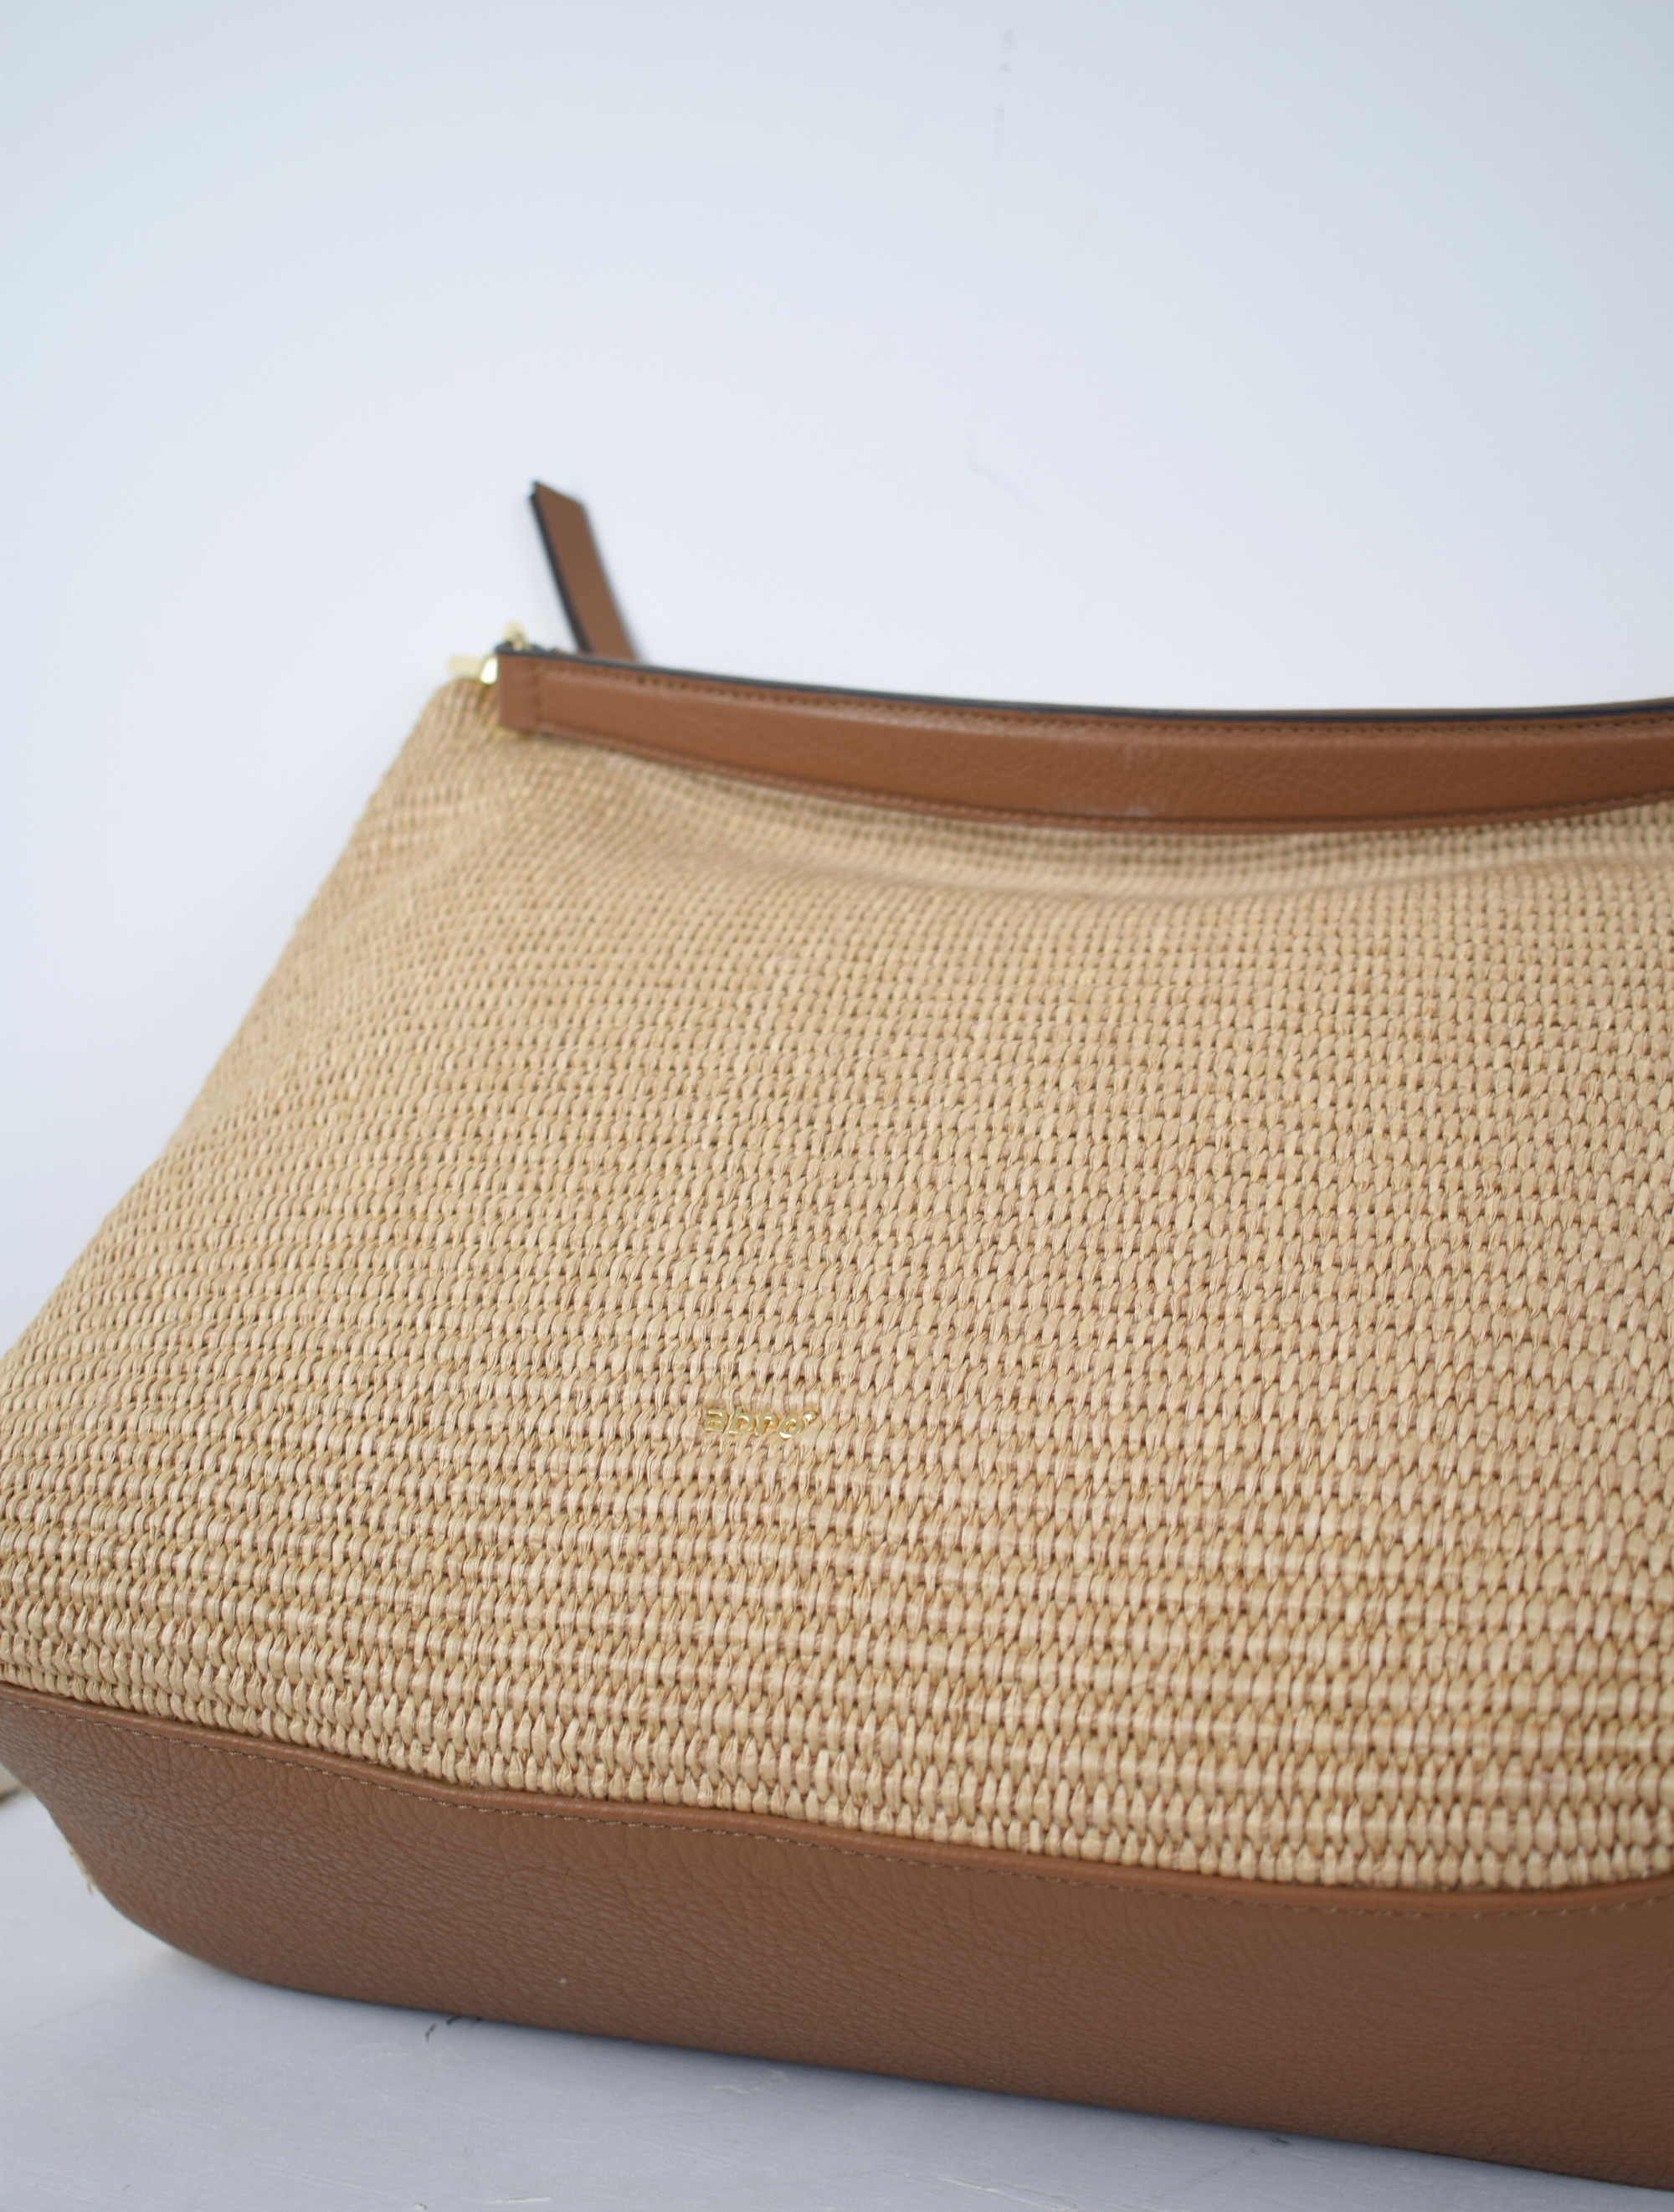 Raffia bag with brown leather strap 